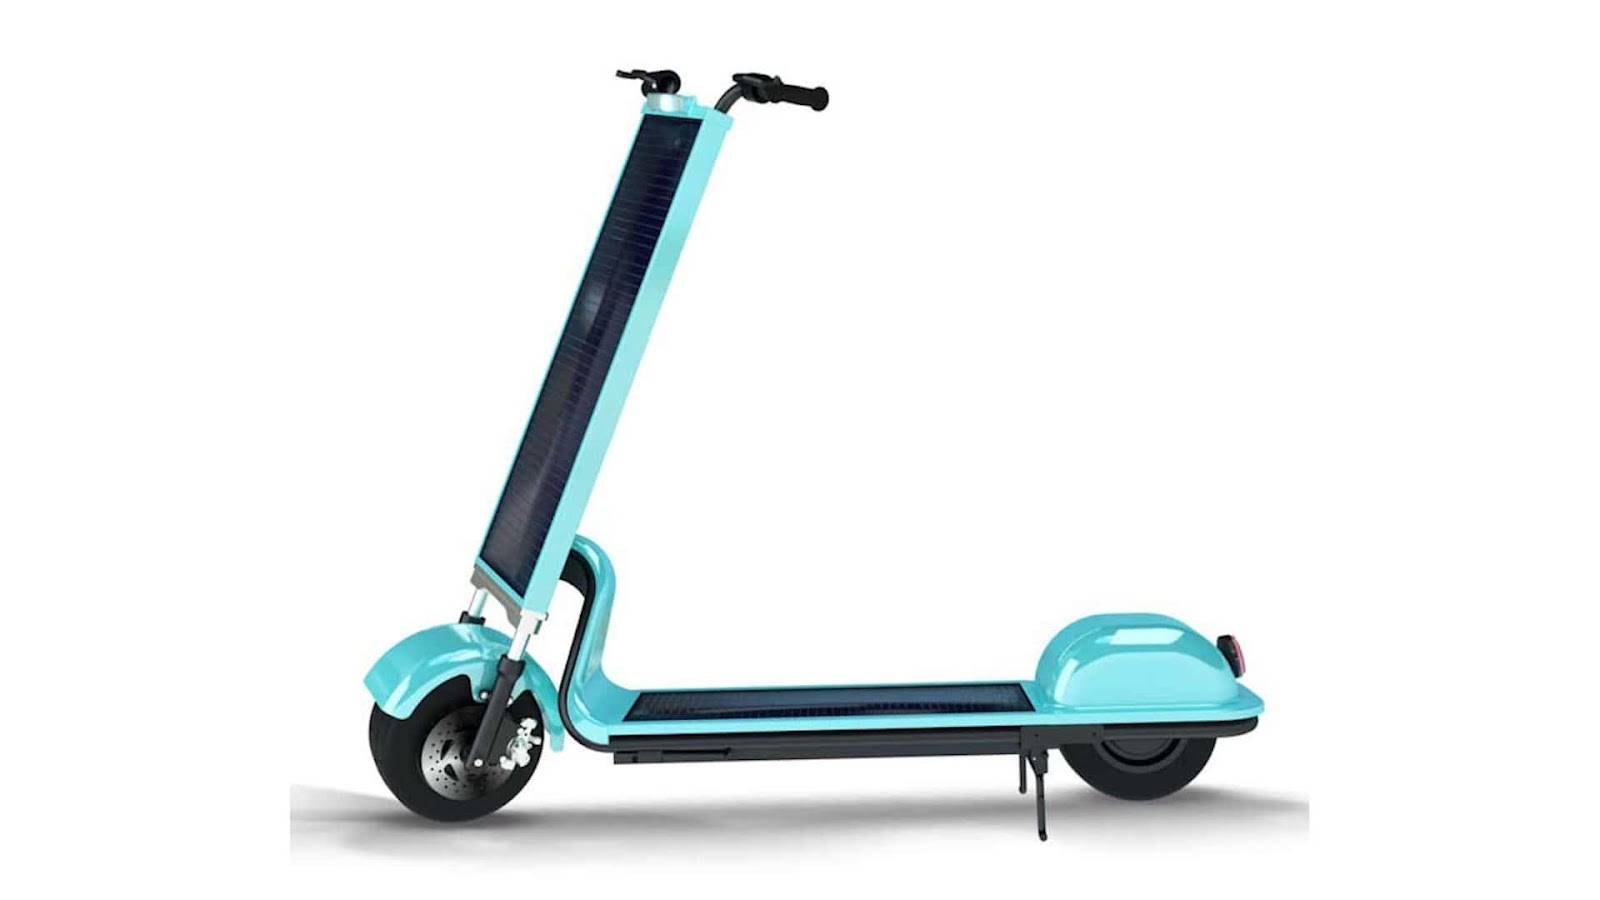 A blue scooter with a long handle

Description automatically generated